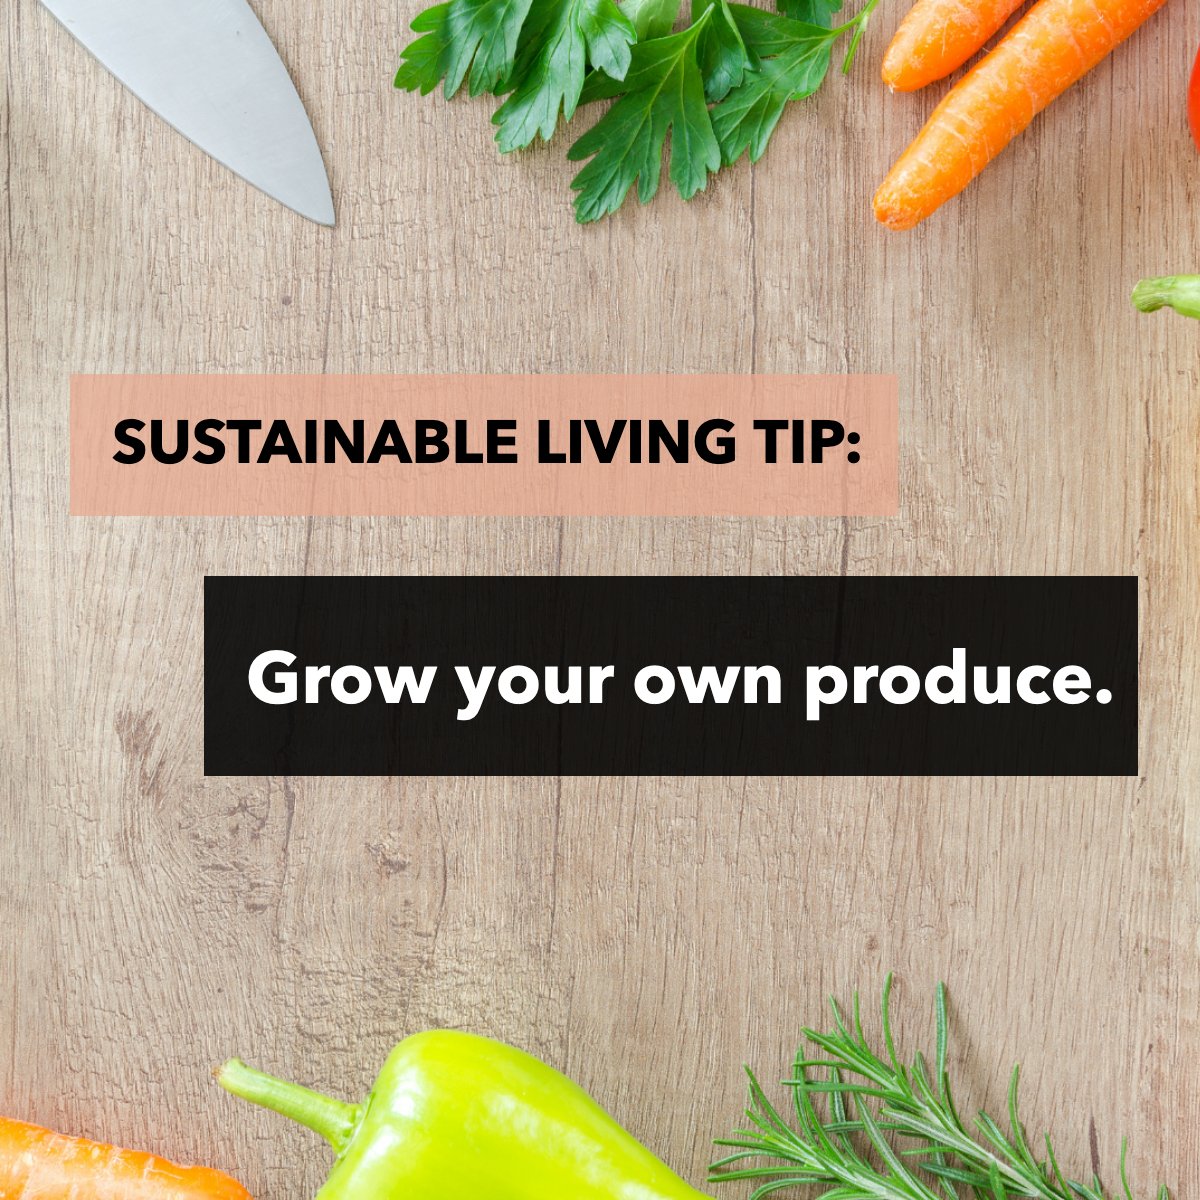 Do you cultivate some of your vegetables or food 🍅?  This is not only healthier but extremely sustainable! 

#sustainablelifestyle    #sustainable    #sustainablity    #sustainablefood 
#AskDomailleRealEstate #LoveWhereYouLive #byronMNRealEstate #RochesterMNRealEstate